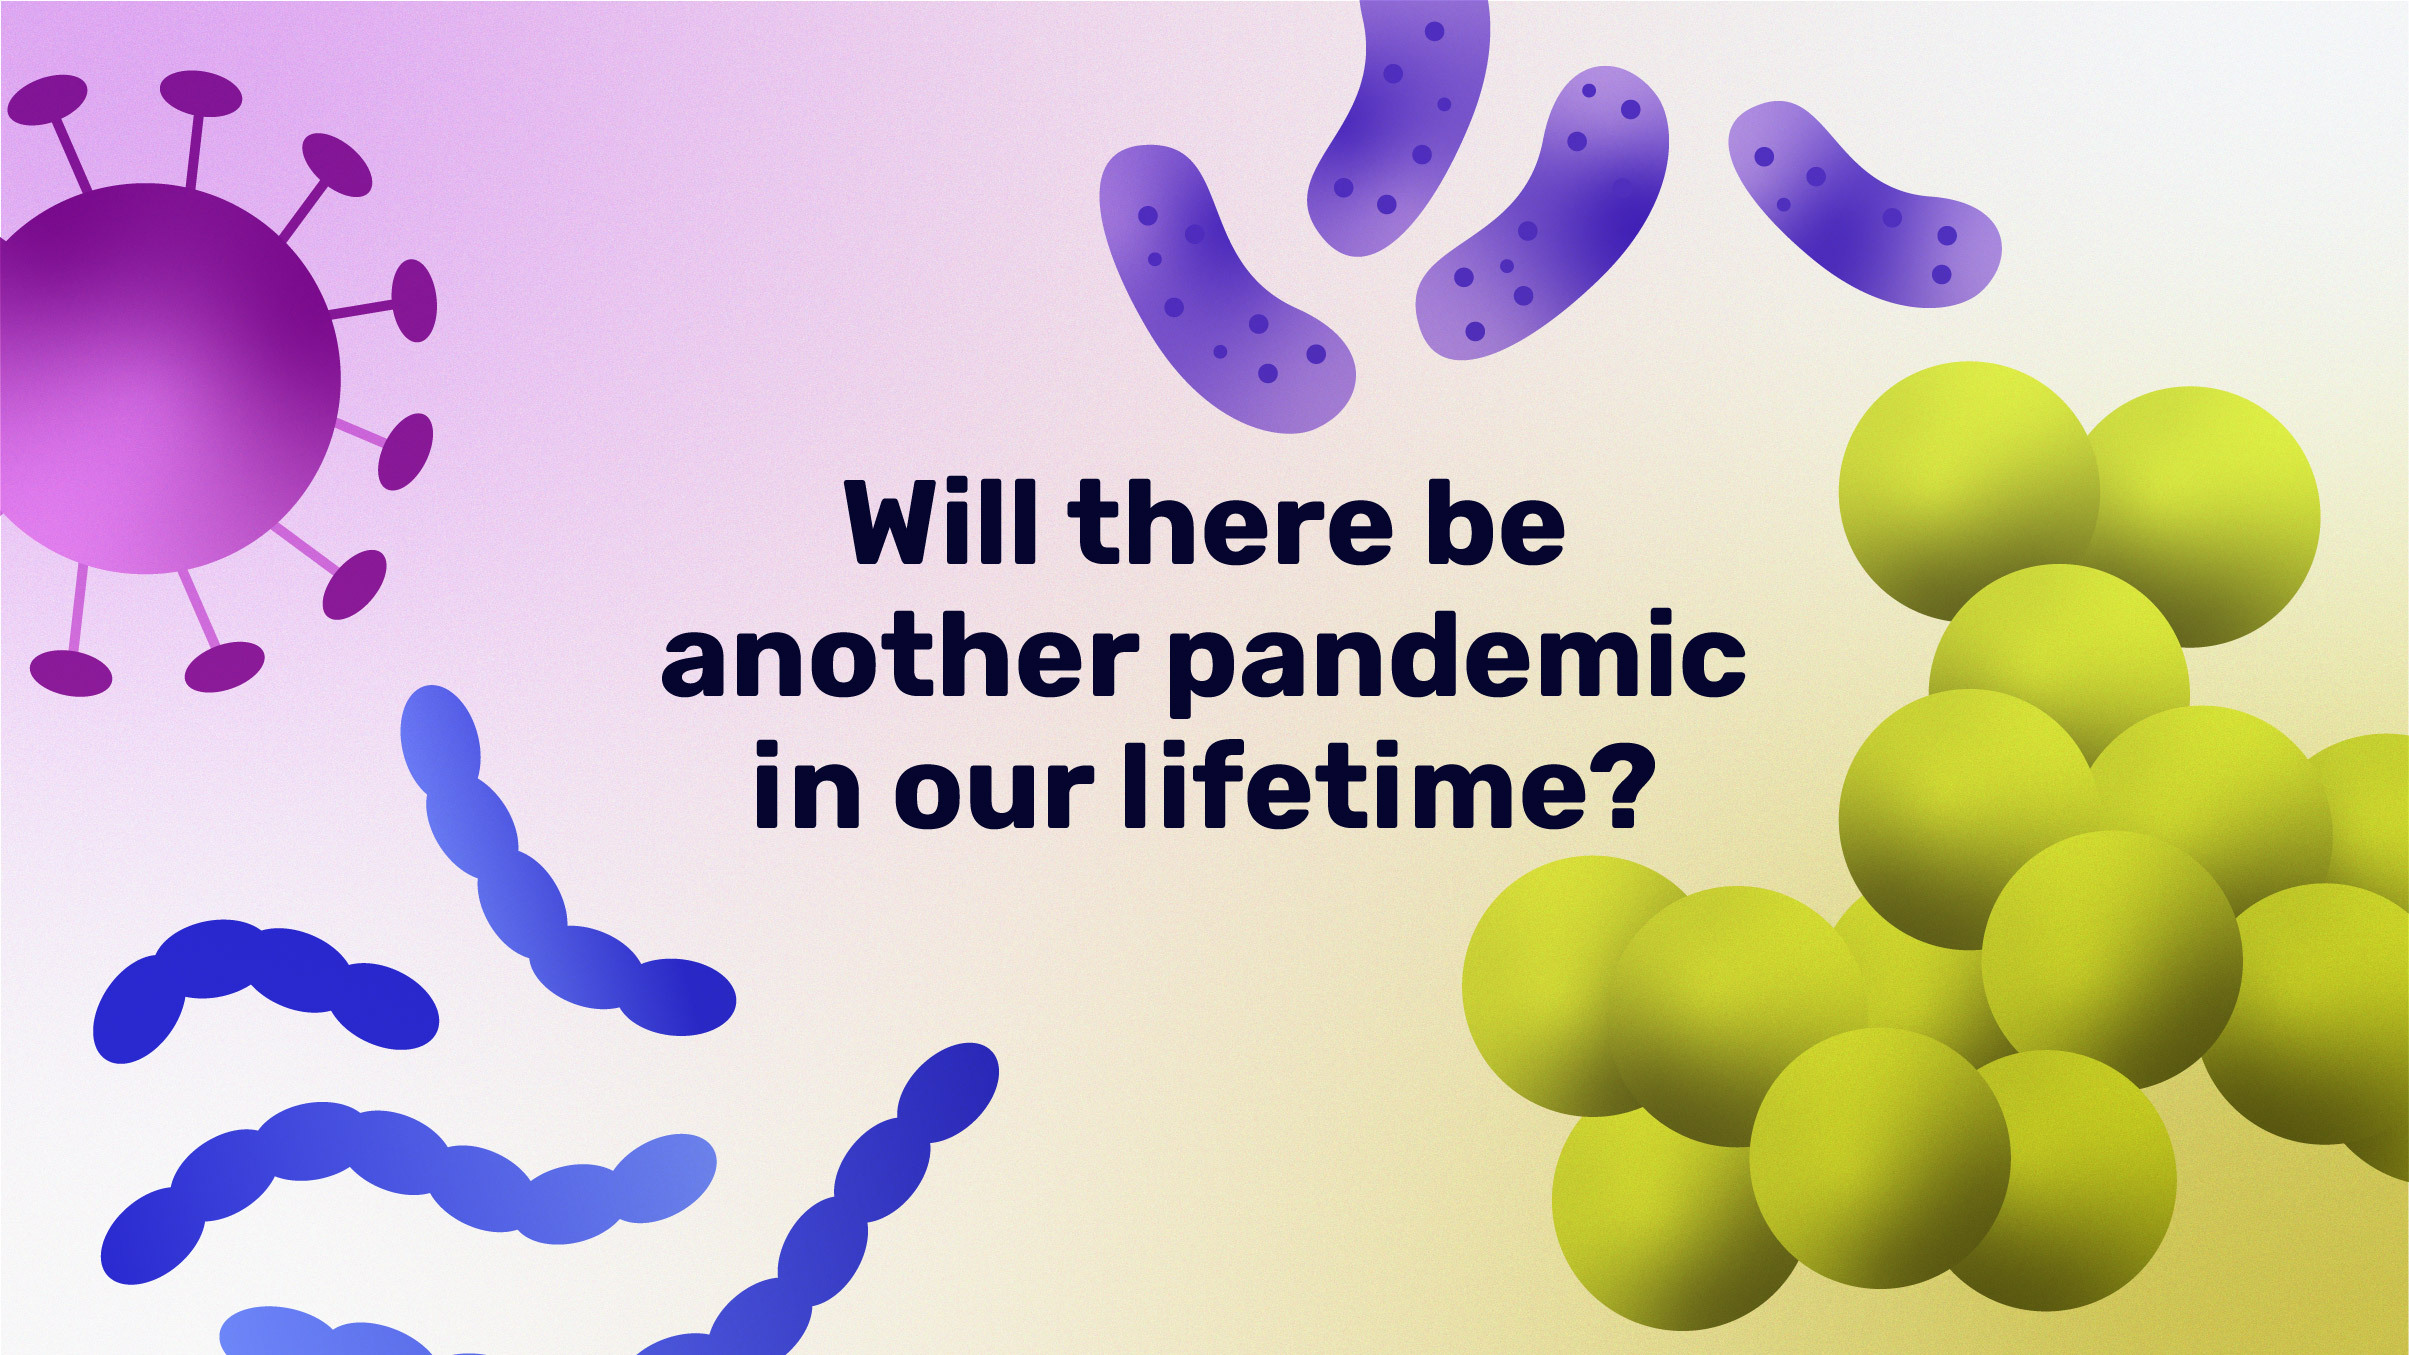 Will there be another pandemic in our lifetime?